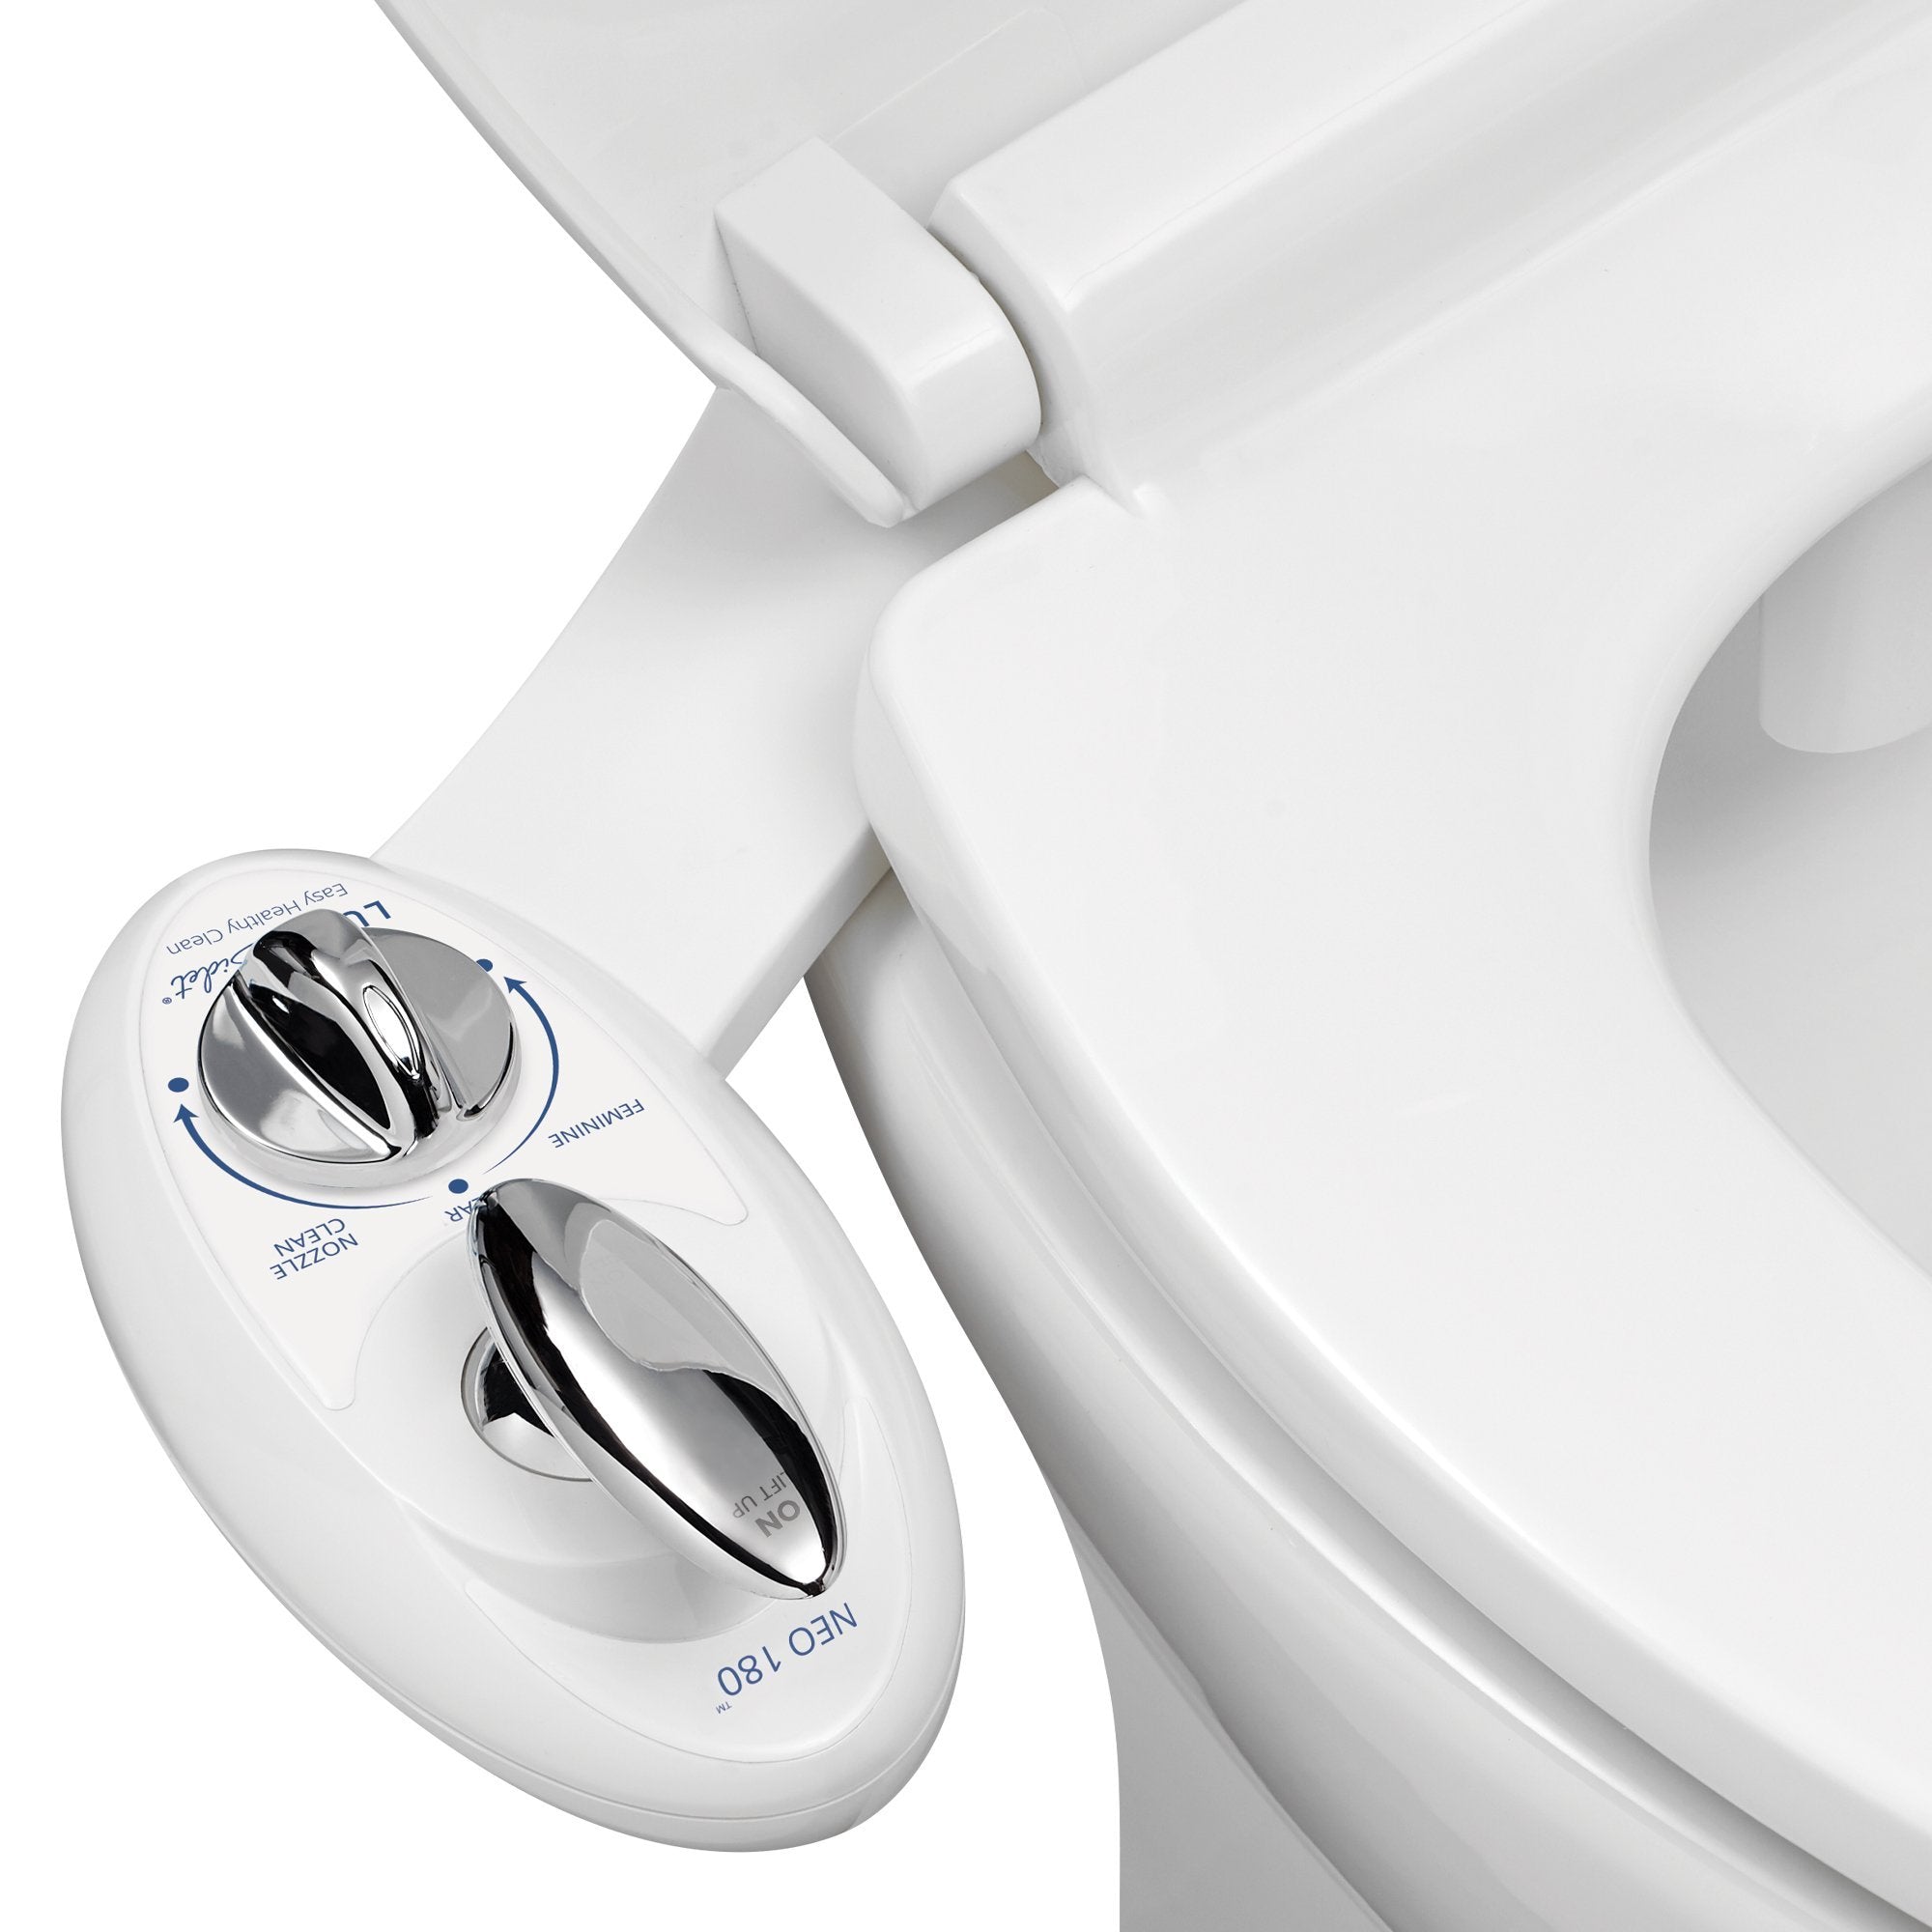 NEO 180 White installed on a toilet, open lid